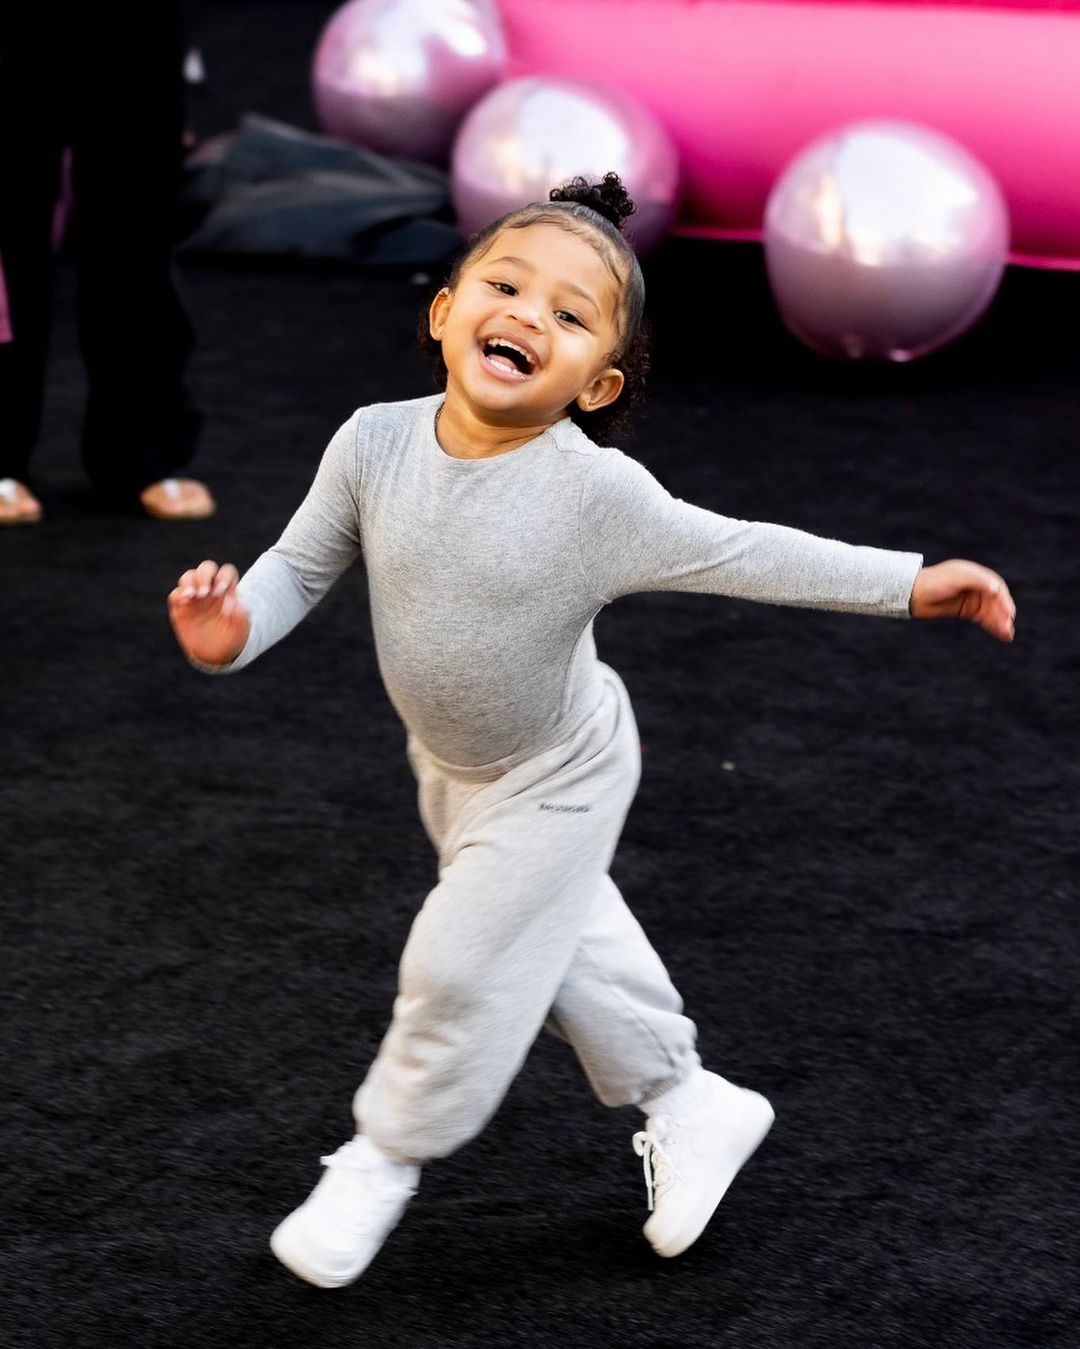 Stormi Webster flashes a smile while rocking a "groutfit," a monochromatic outfit made up of different shades of grey clothings, along with fresh white sneakers